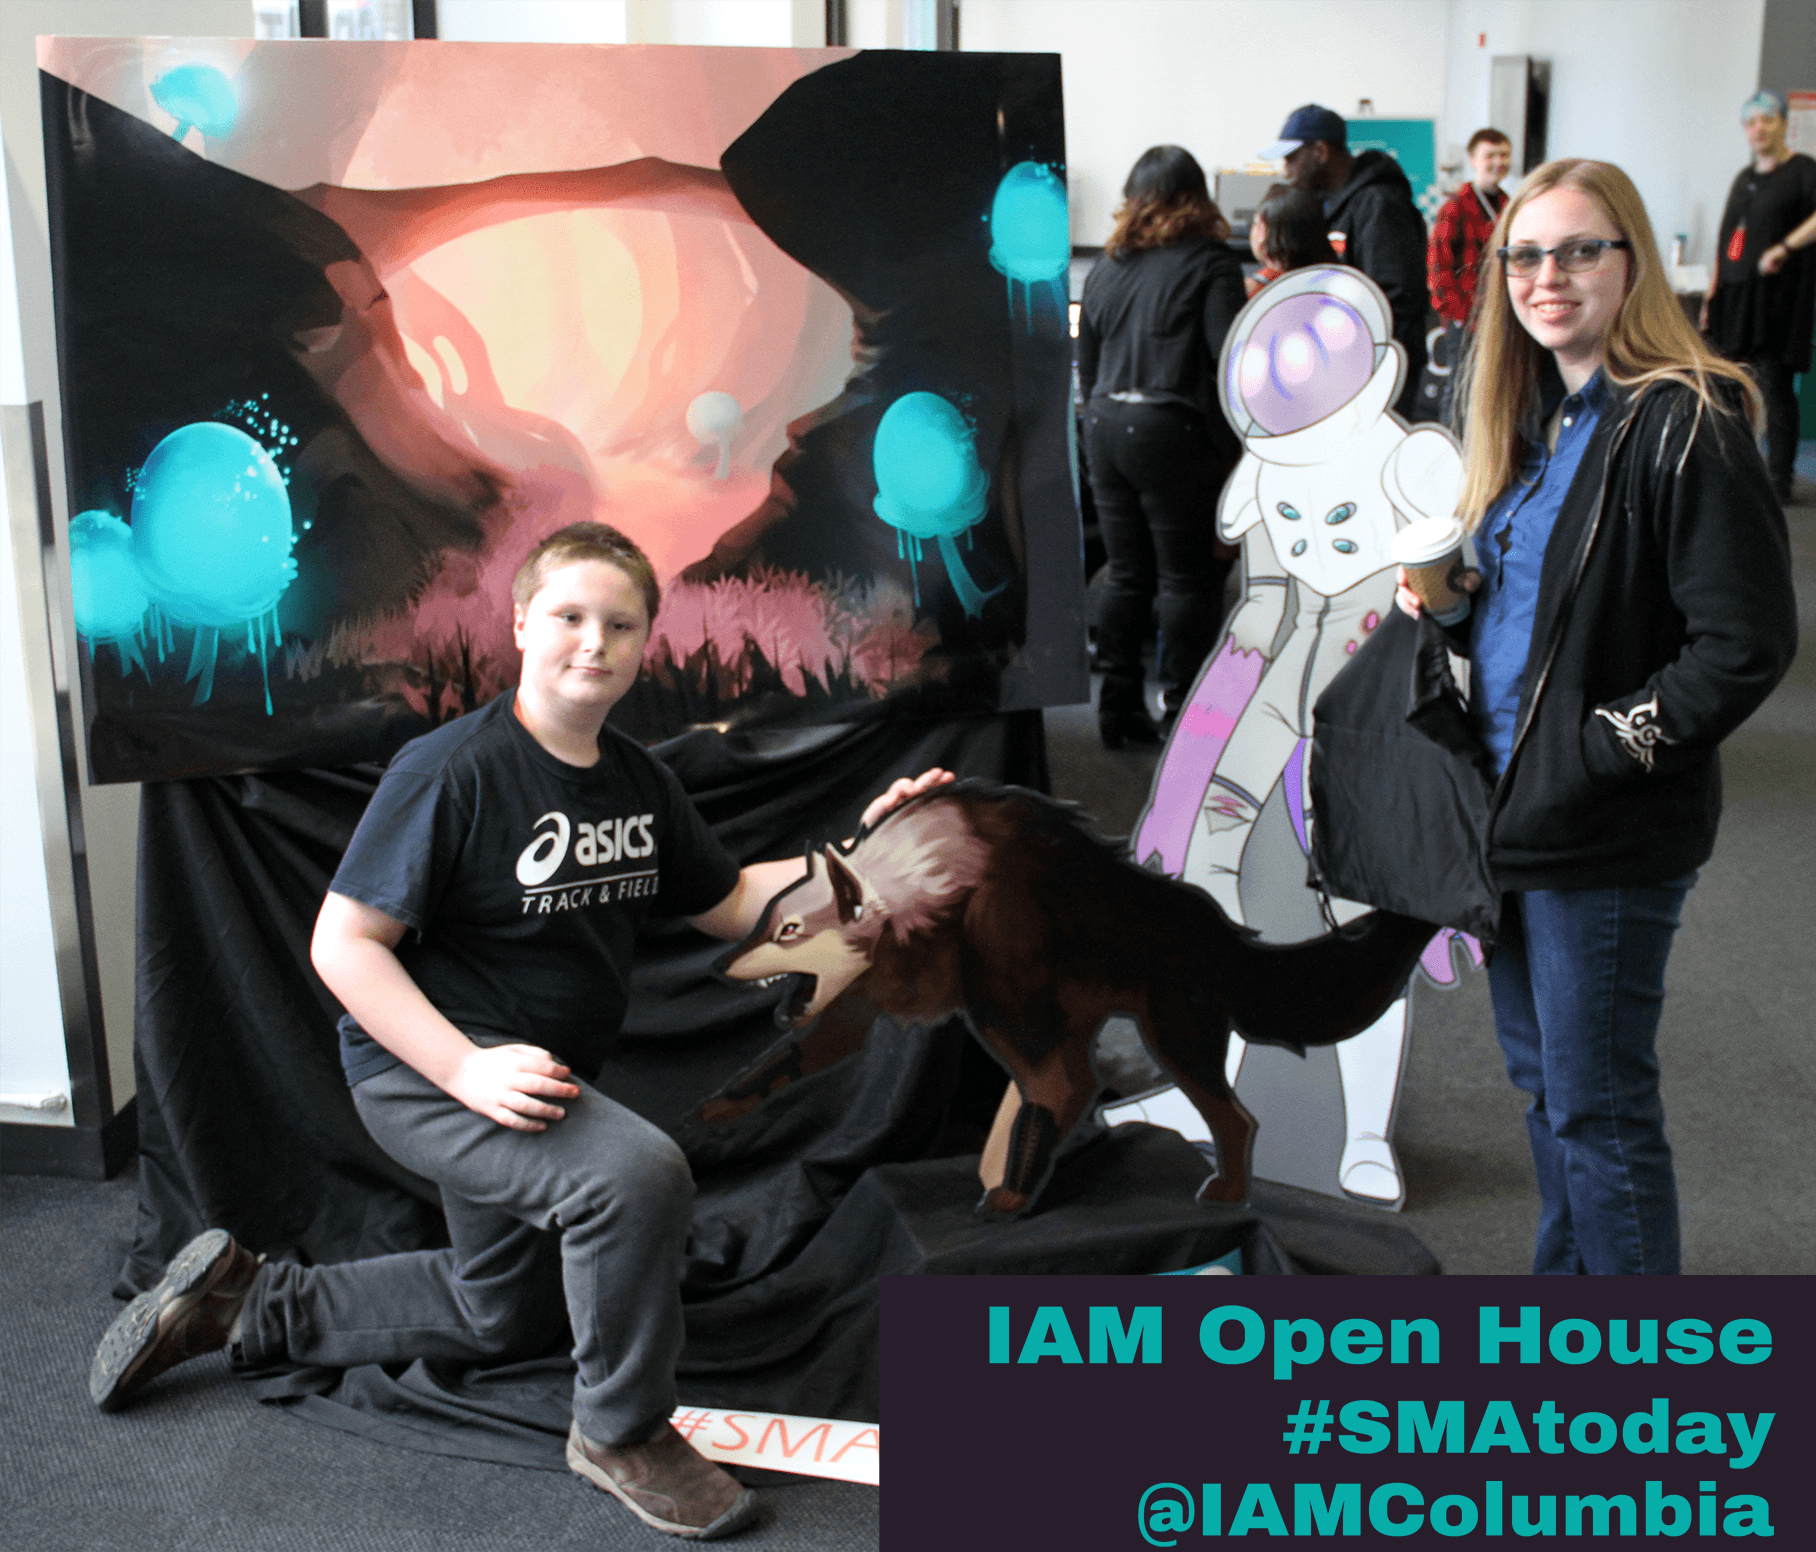 Guests at IAM's open house event 2018 photographed in front of student work